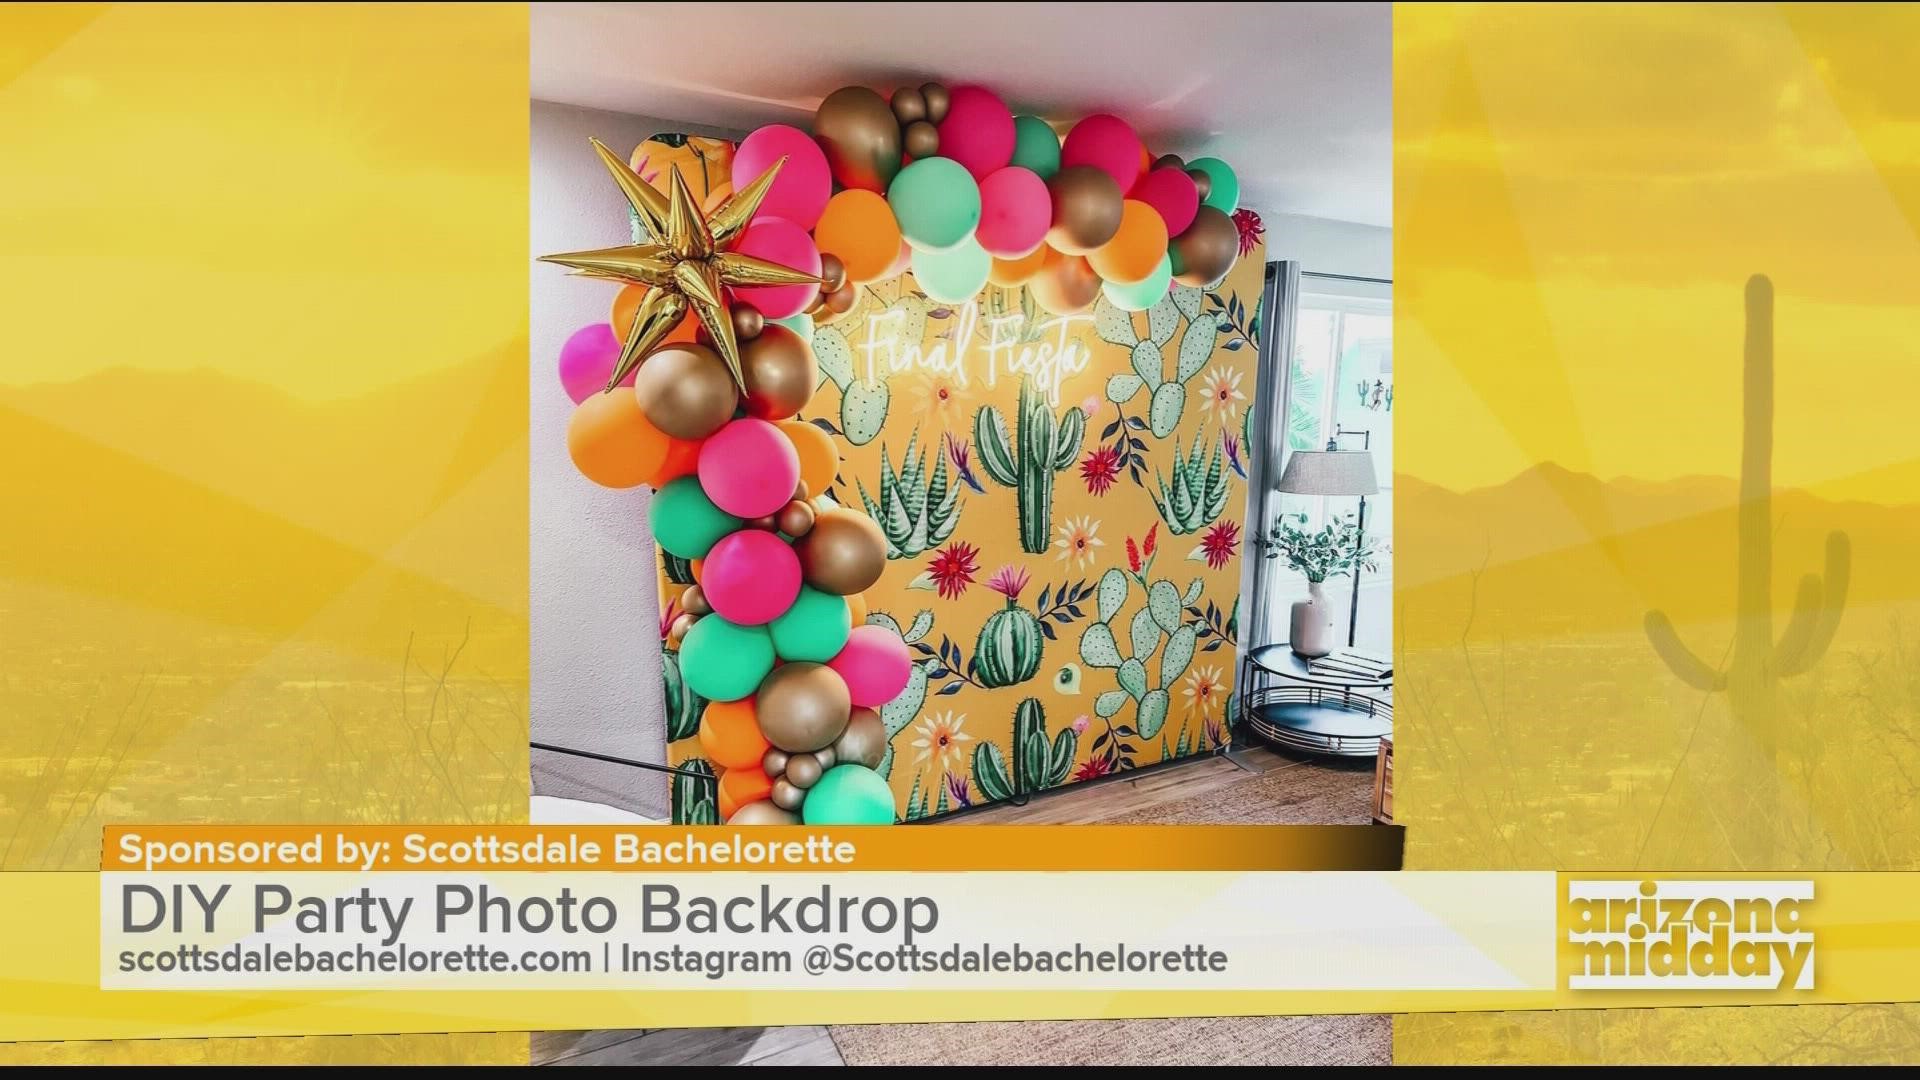 Casey Hohman, Owner of Scottsdale Bachelorette, shows us how to make a party photo backdrop & how he can help plan the ultimate bachelorette!